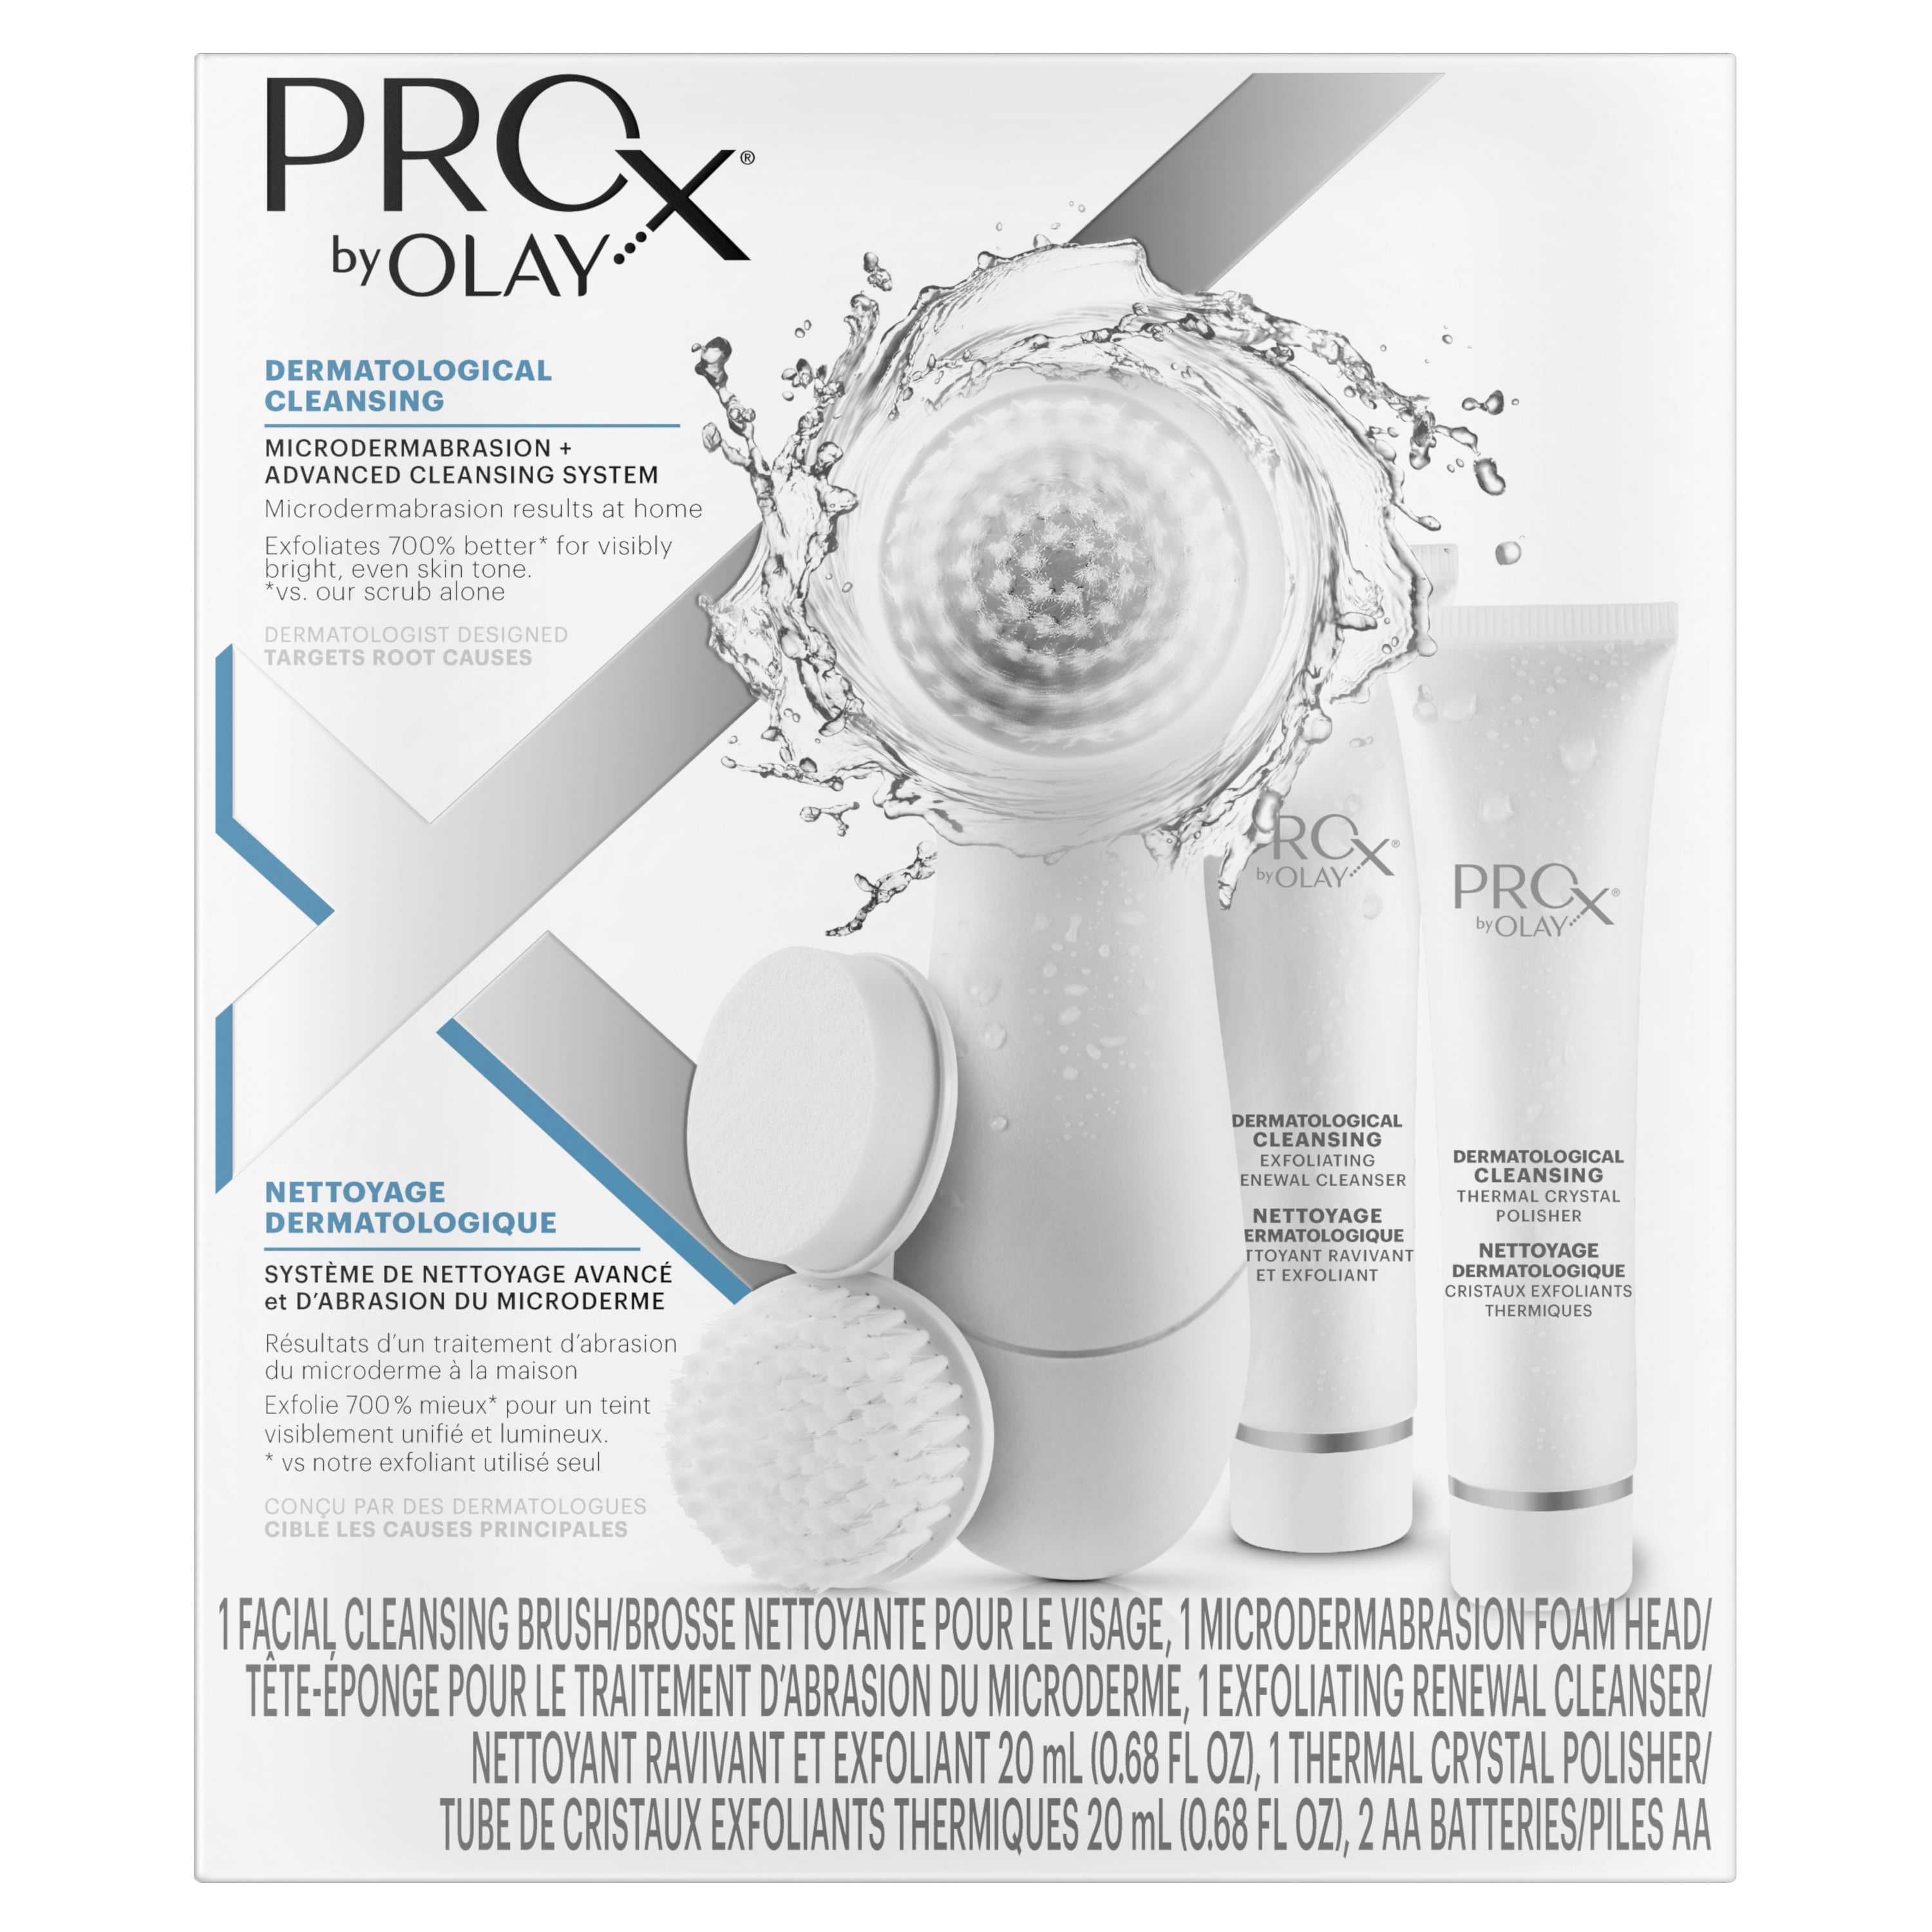 Advanced cleansing. PROX by olay. Косметологический аппарат Moisturising facial Cleansing. Advanced сдуфтштп. Косметологический аппарат Moisturising facial Cleansing направление.